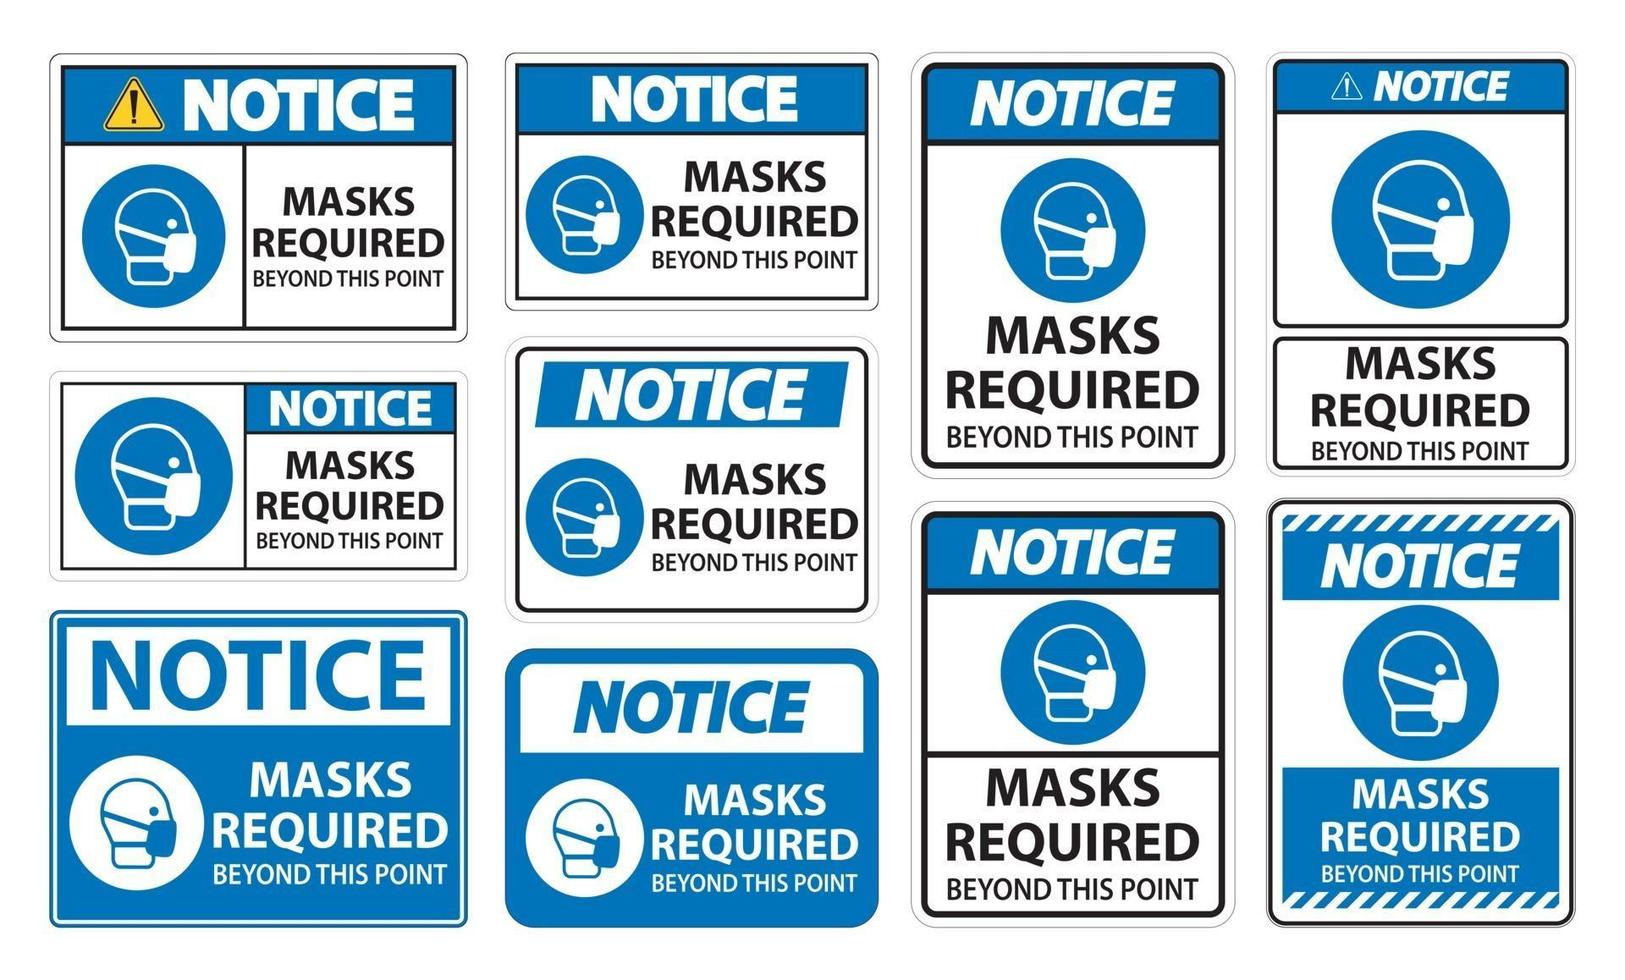 Notice Masks Required Beyond This Point Sign Isolate On White Background,Vector Illustration EPS.10 vector